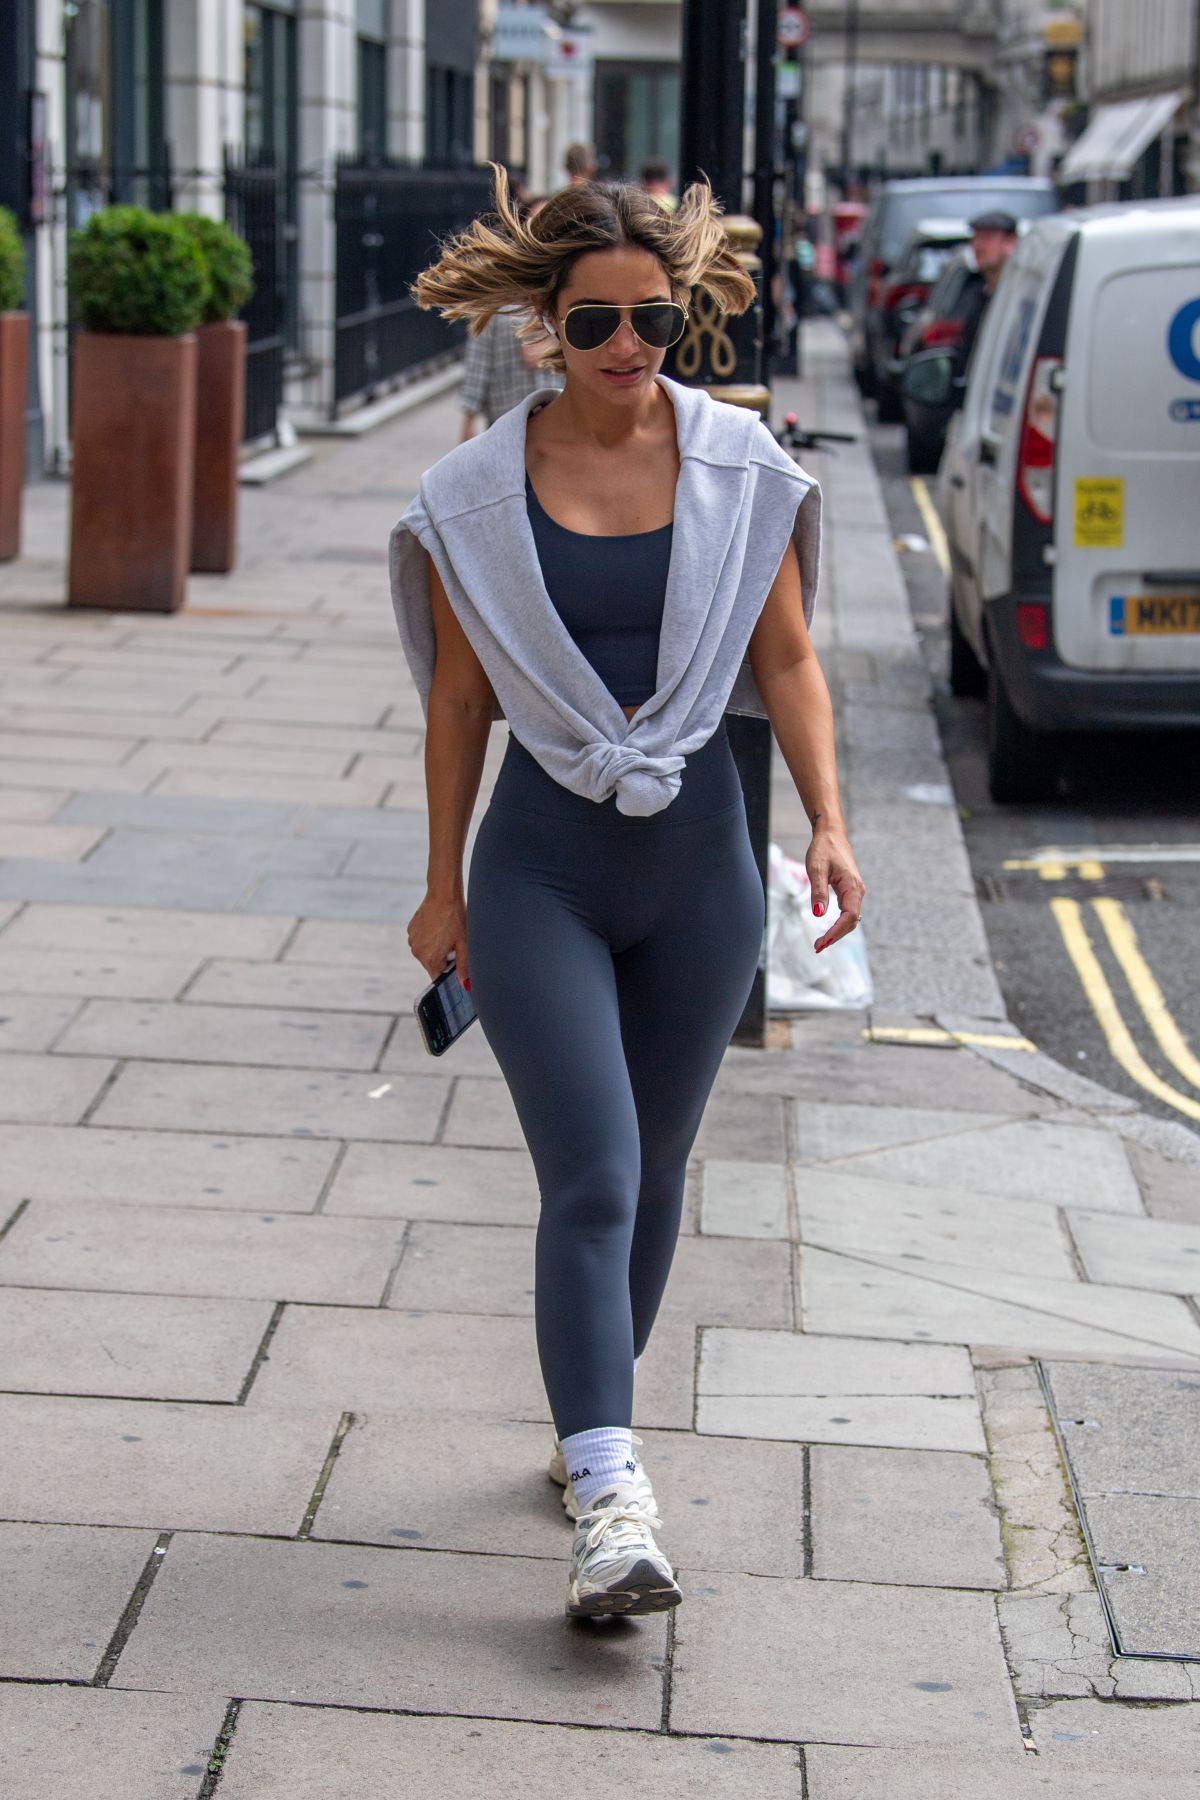 FRANKIE BRIDGE Out and About in London 08/18/2023 – HawtCelebs